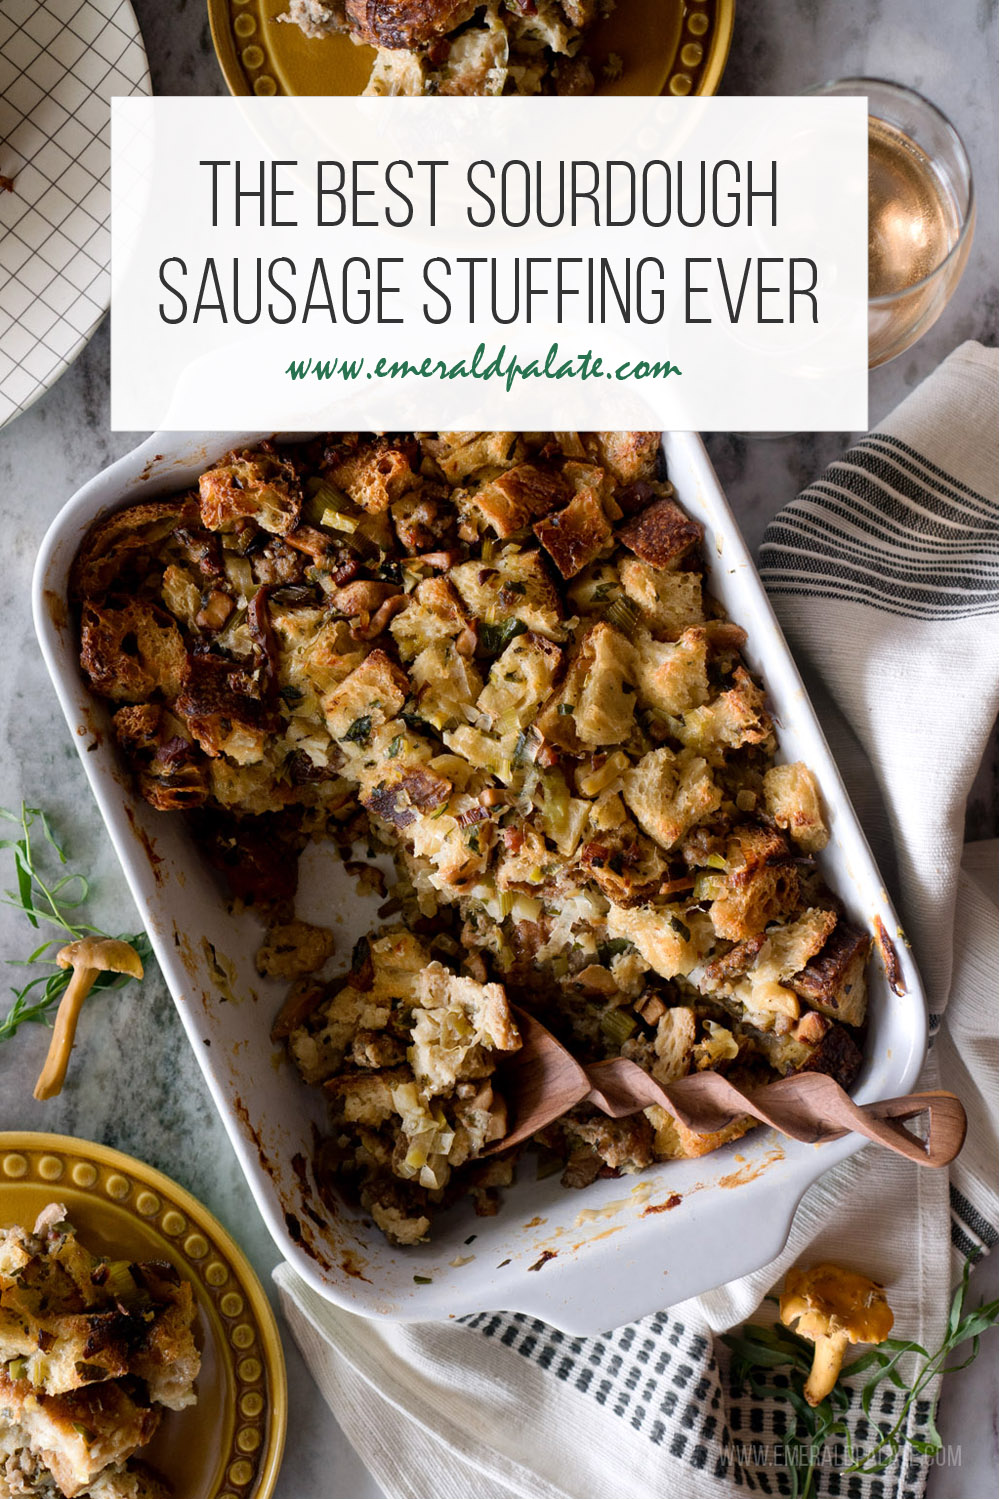 Life-changing sourdought stuffing recipe that will wow everyone at your table. This makes the perfect Thanksgiving stuffing side dish that people will ask the recipe for. If you are looking for the best Thanksgiving stuffing, this is it!